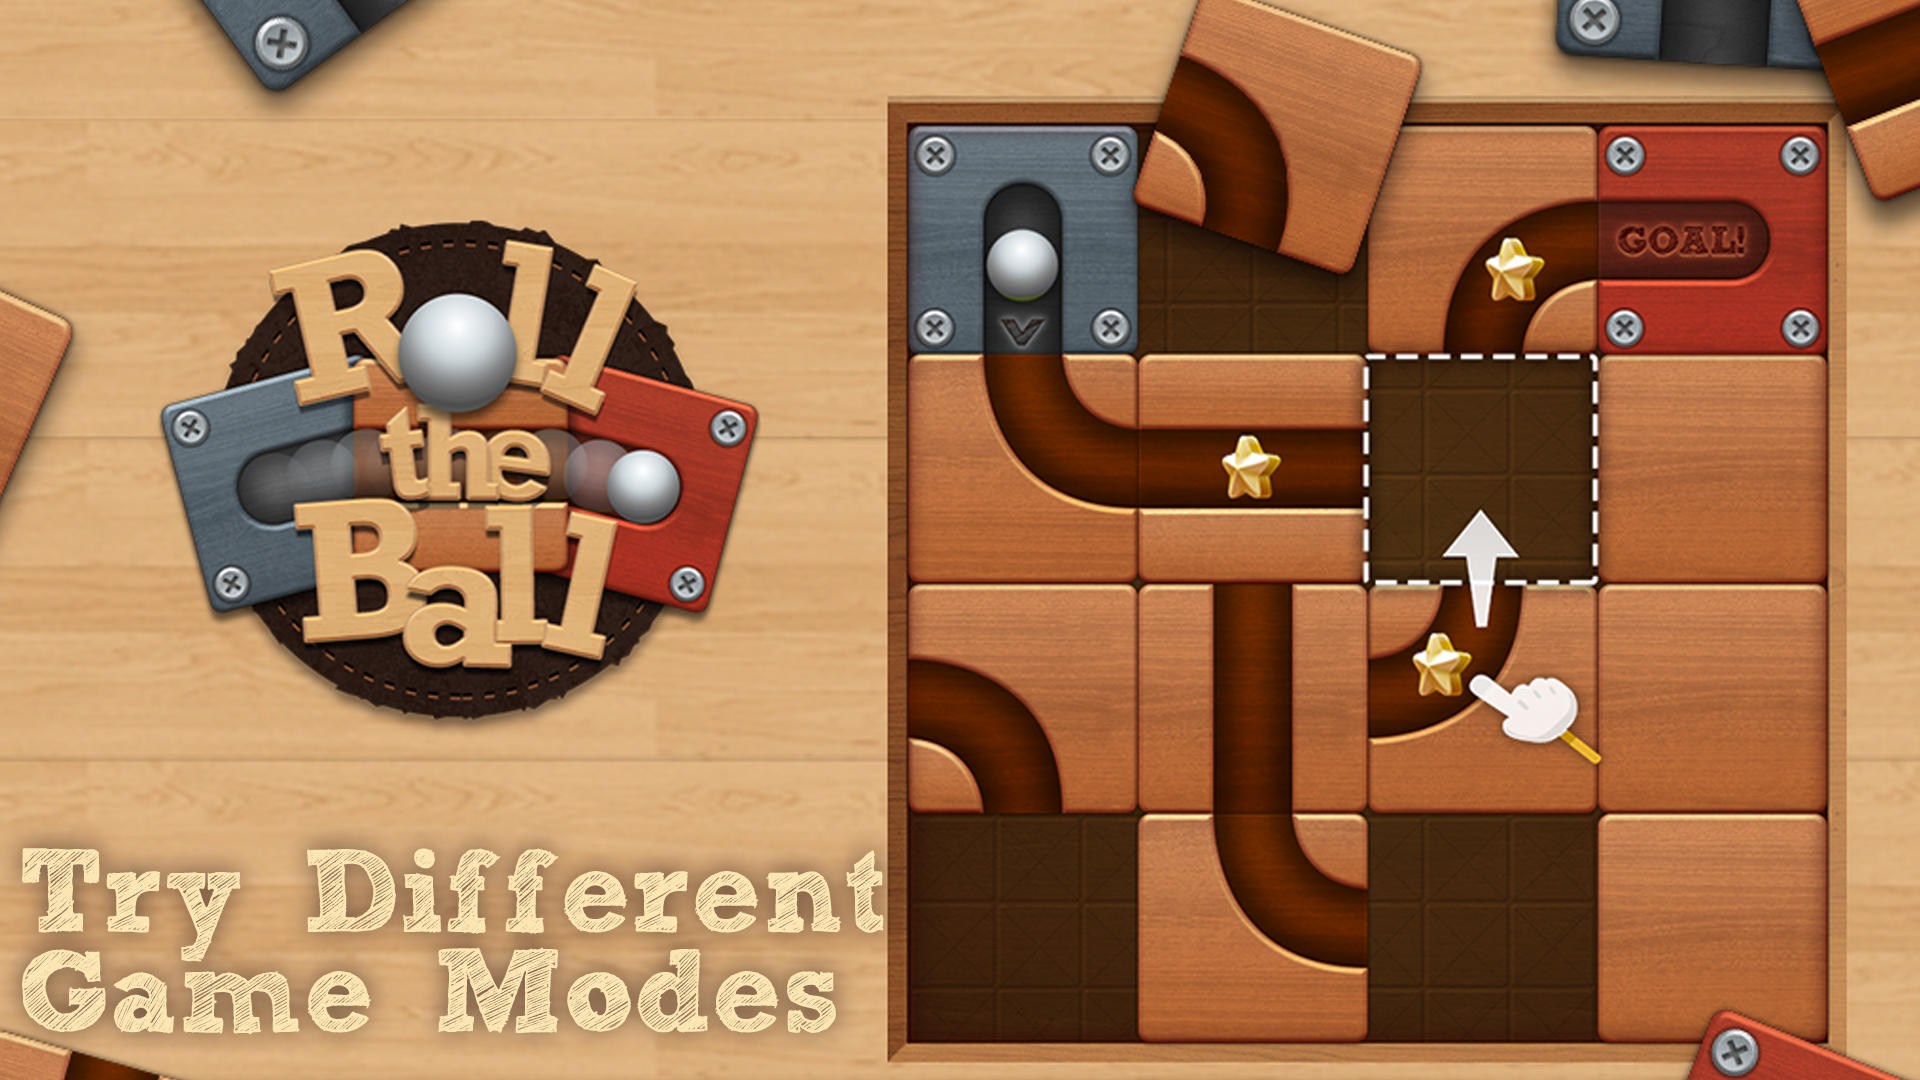 Roll the Ball: slide puzzle pour Android - Télécharger